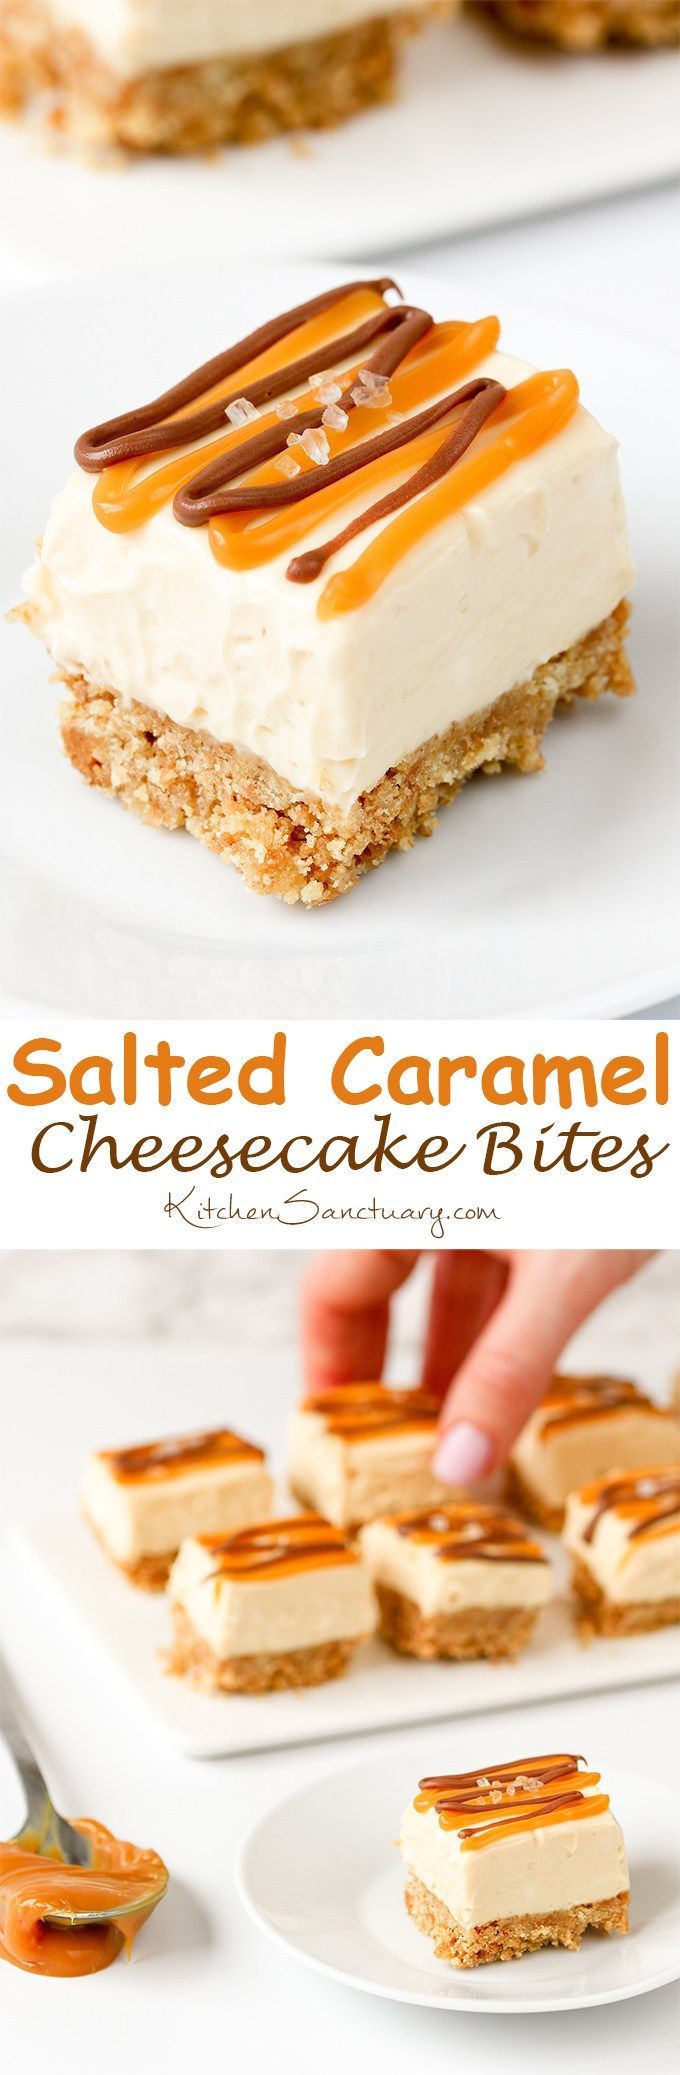 No-bake Salted Caramel Cheesecake bites – great for parties!